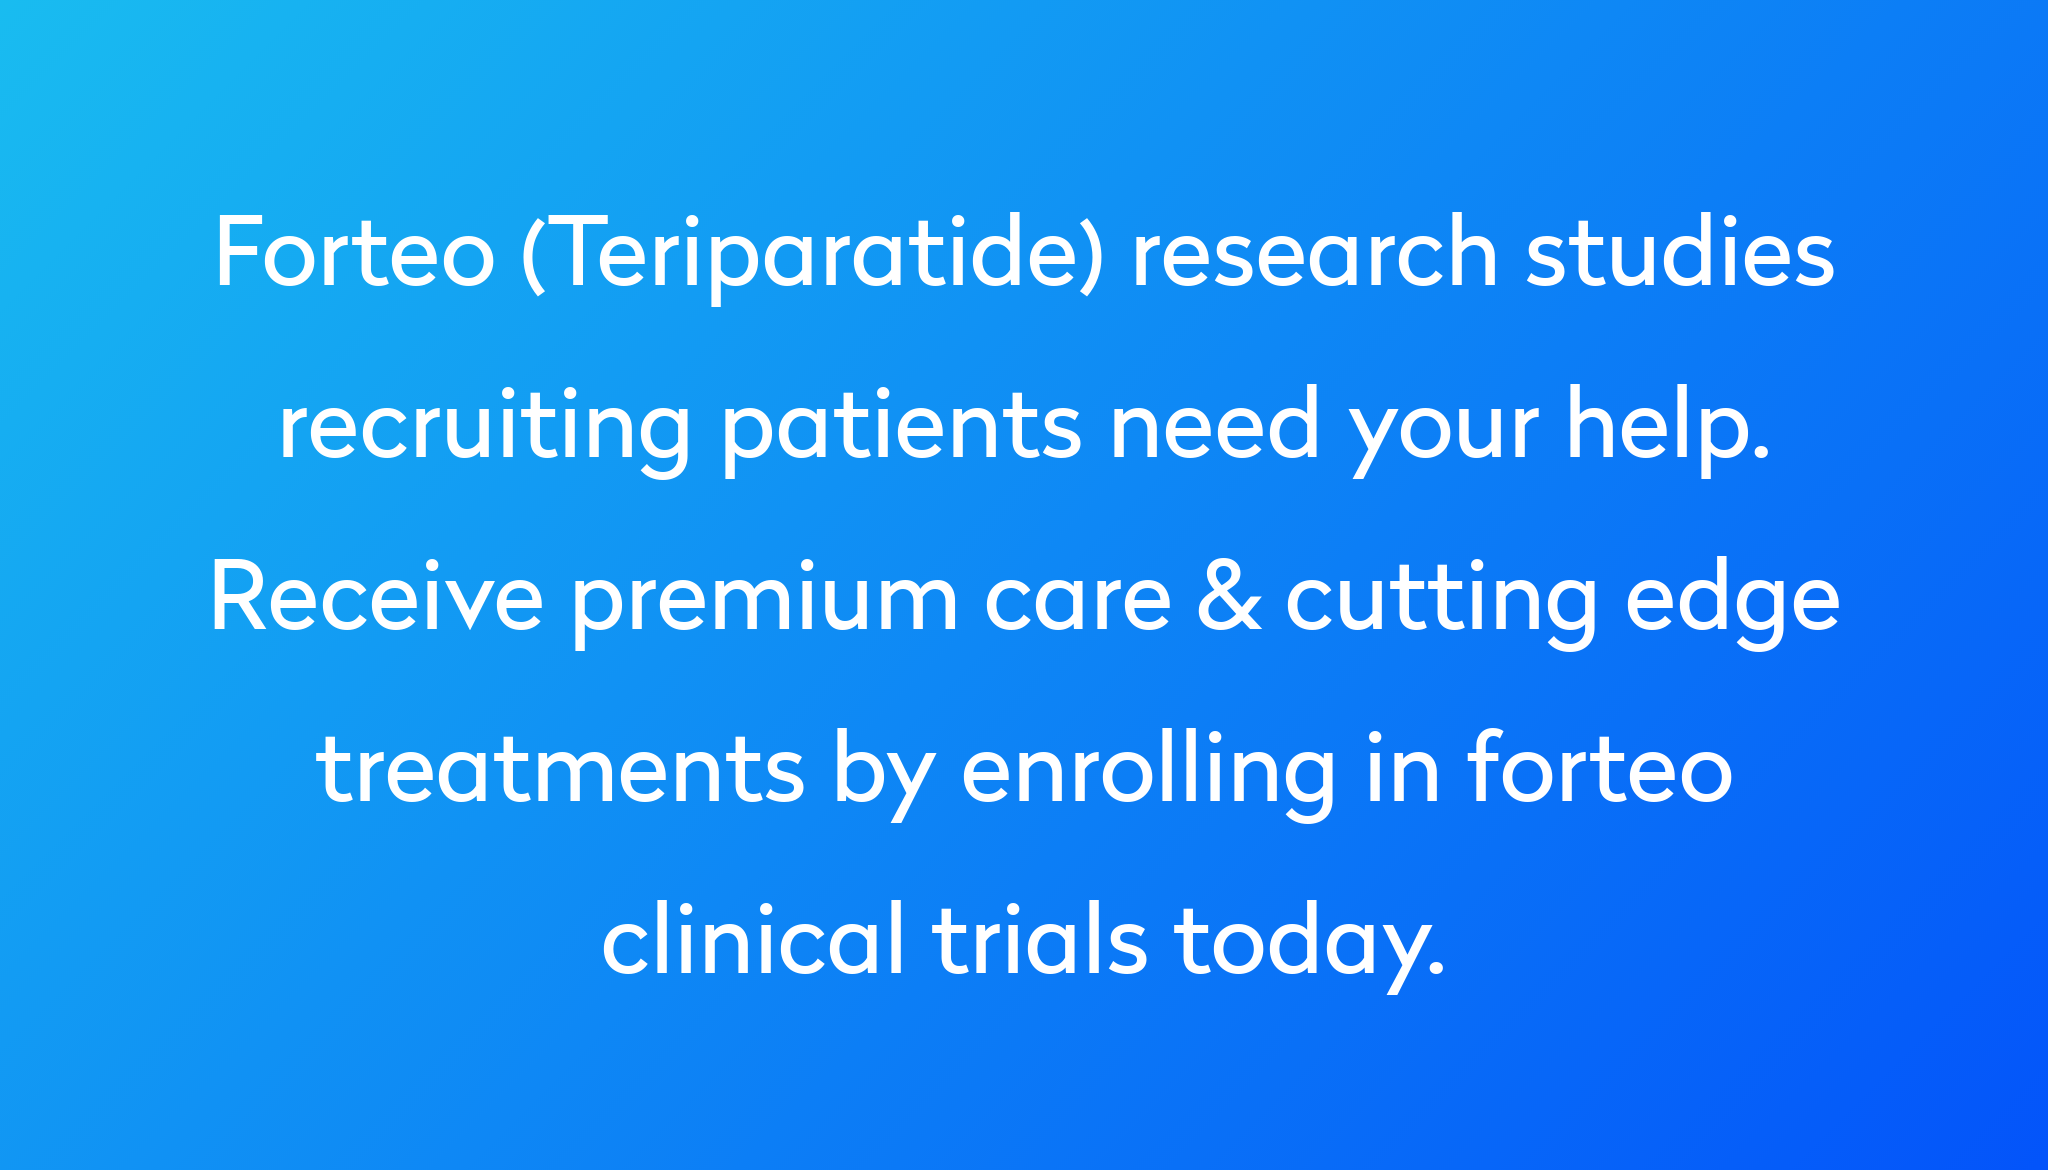 Forteo (Teriparatide) Research Studies Recruiting Patients Need Your Help. Receive Premium Care & Cutting Edge Treatments By Enrolling In Forteo Clinical Trials Today. ?md=1